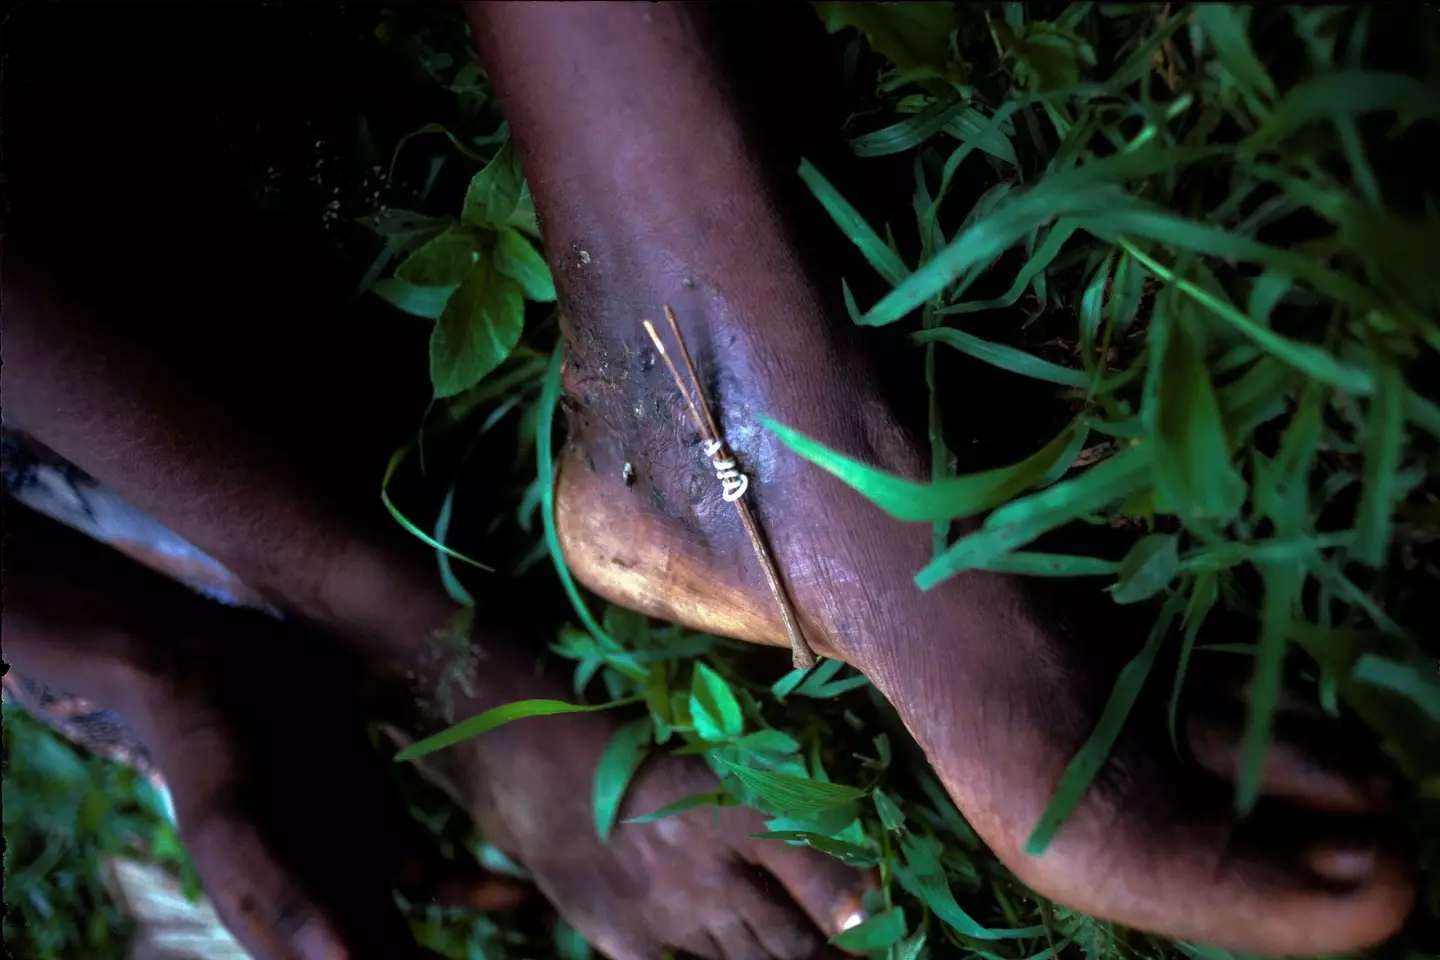 Guinea worm extraction is a gruesome and painful procedure.